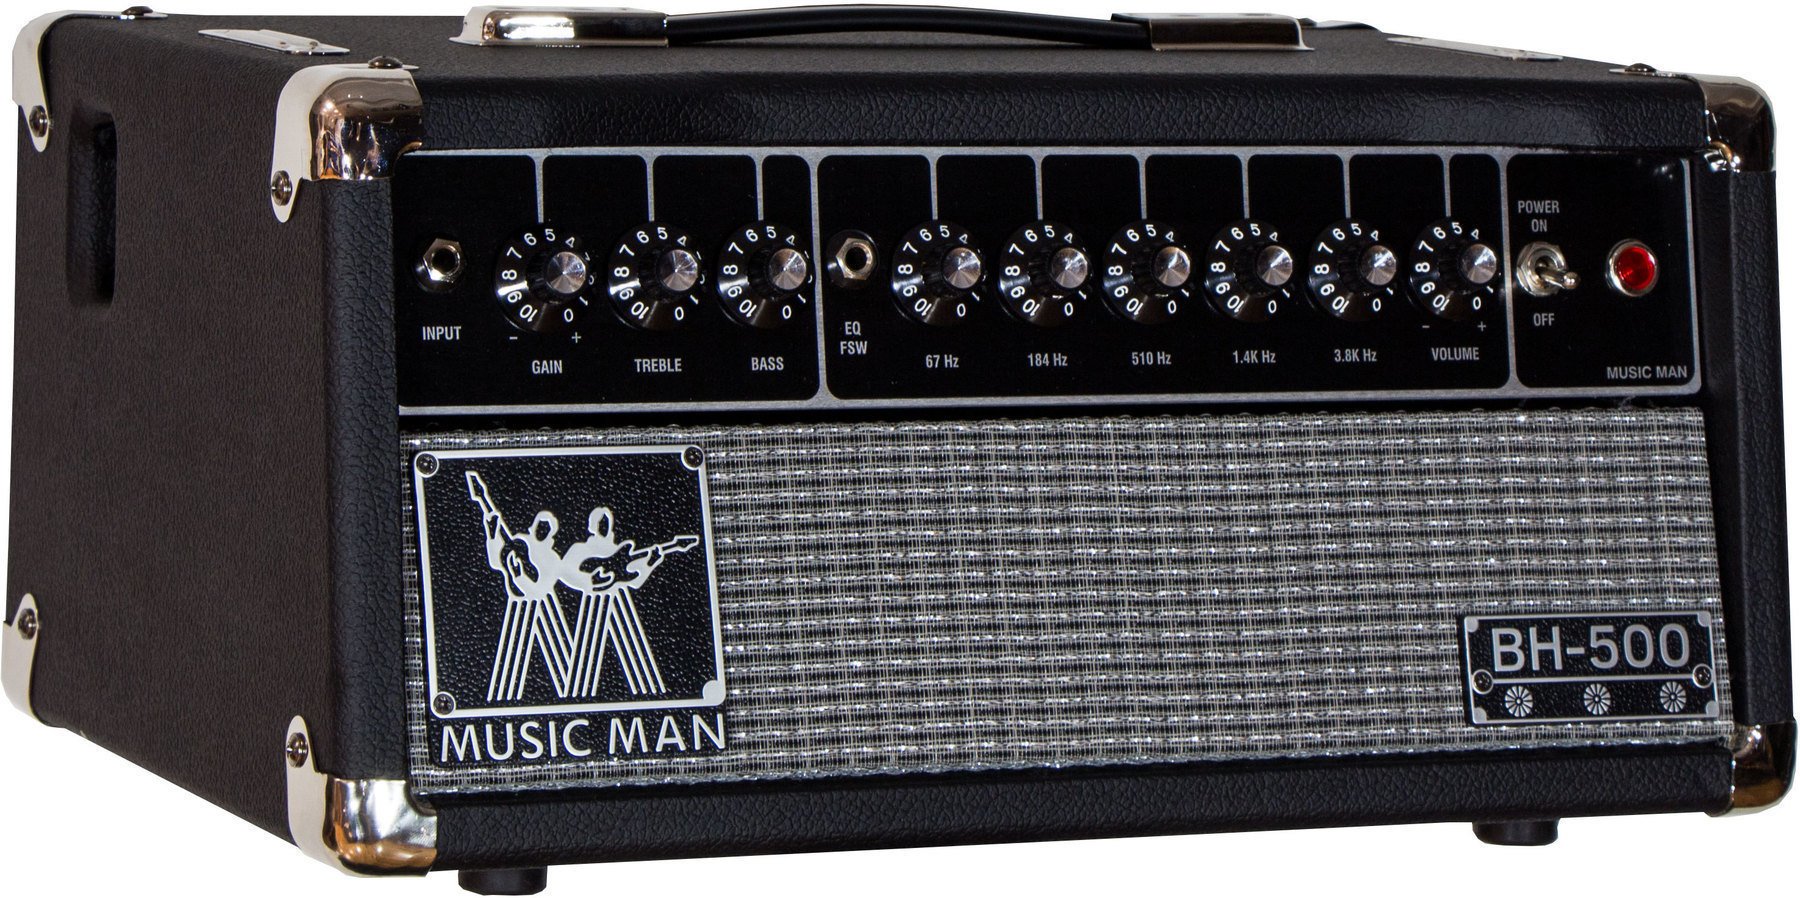 Solid-State Bass Amplifier Music Man BH 500